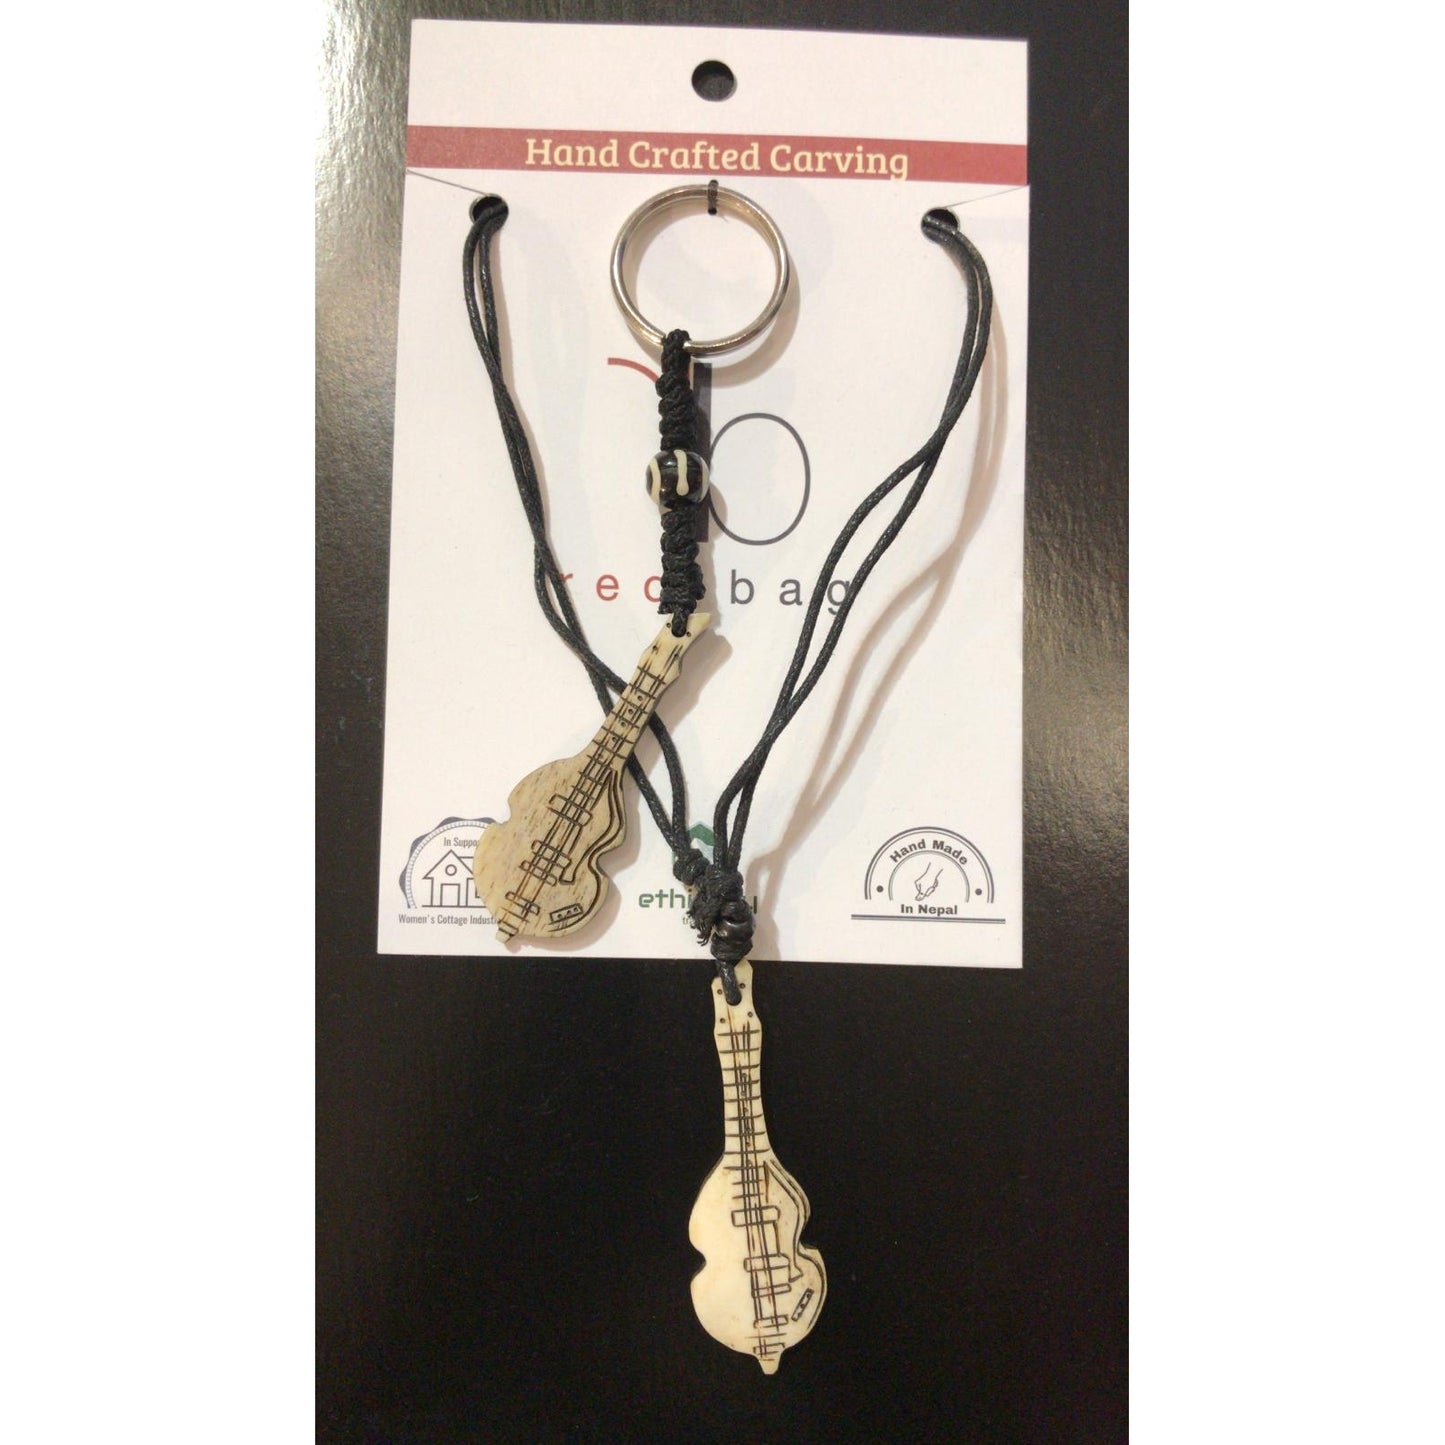 Bone Carving Necklace and Key Chain Combo